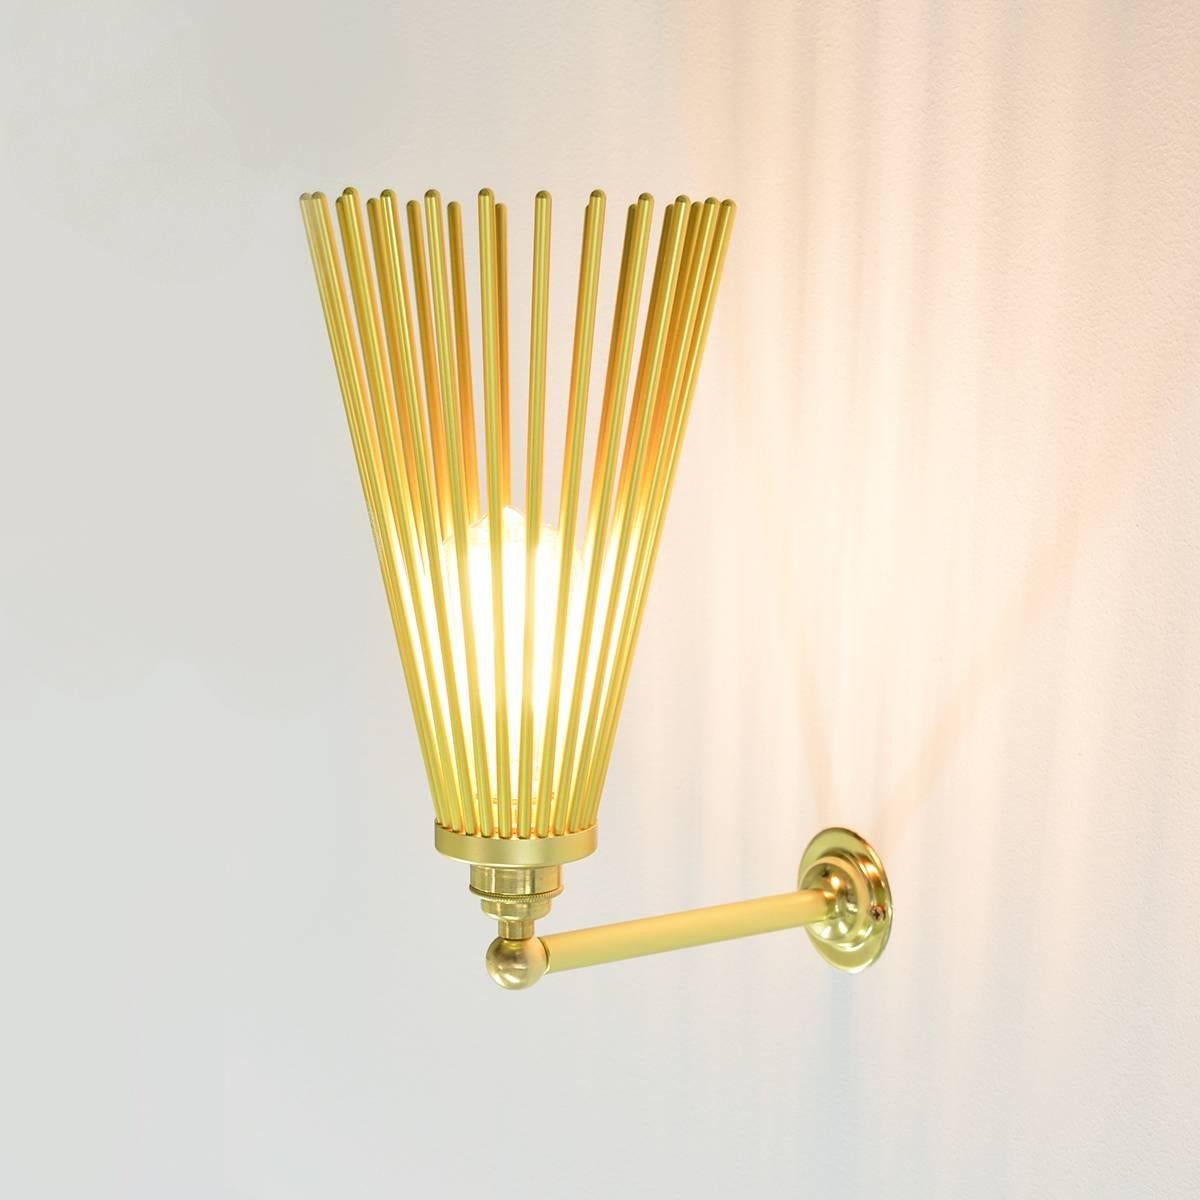 Polished Pair of European Modern Aluminium Brass Wall Light Sconces For Sale